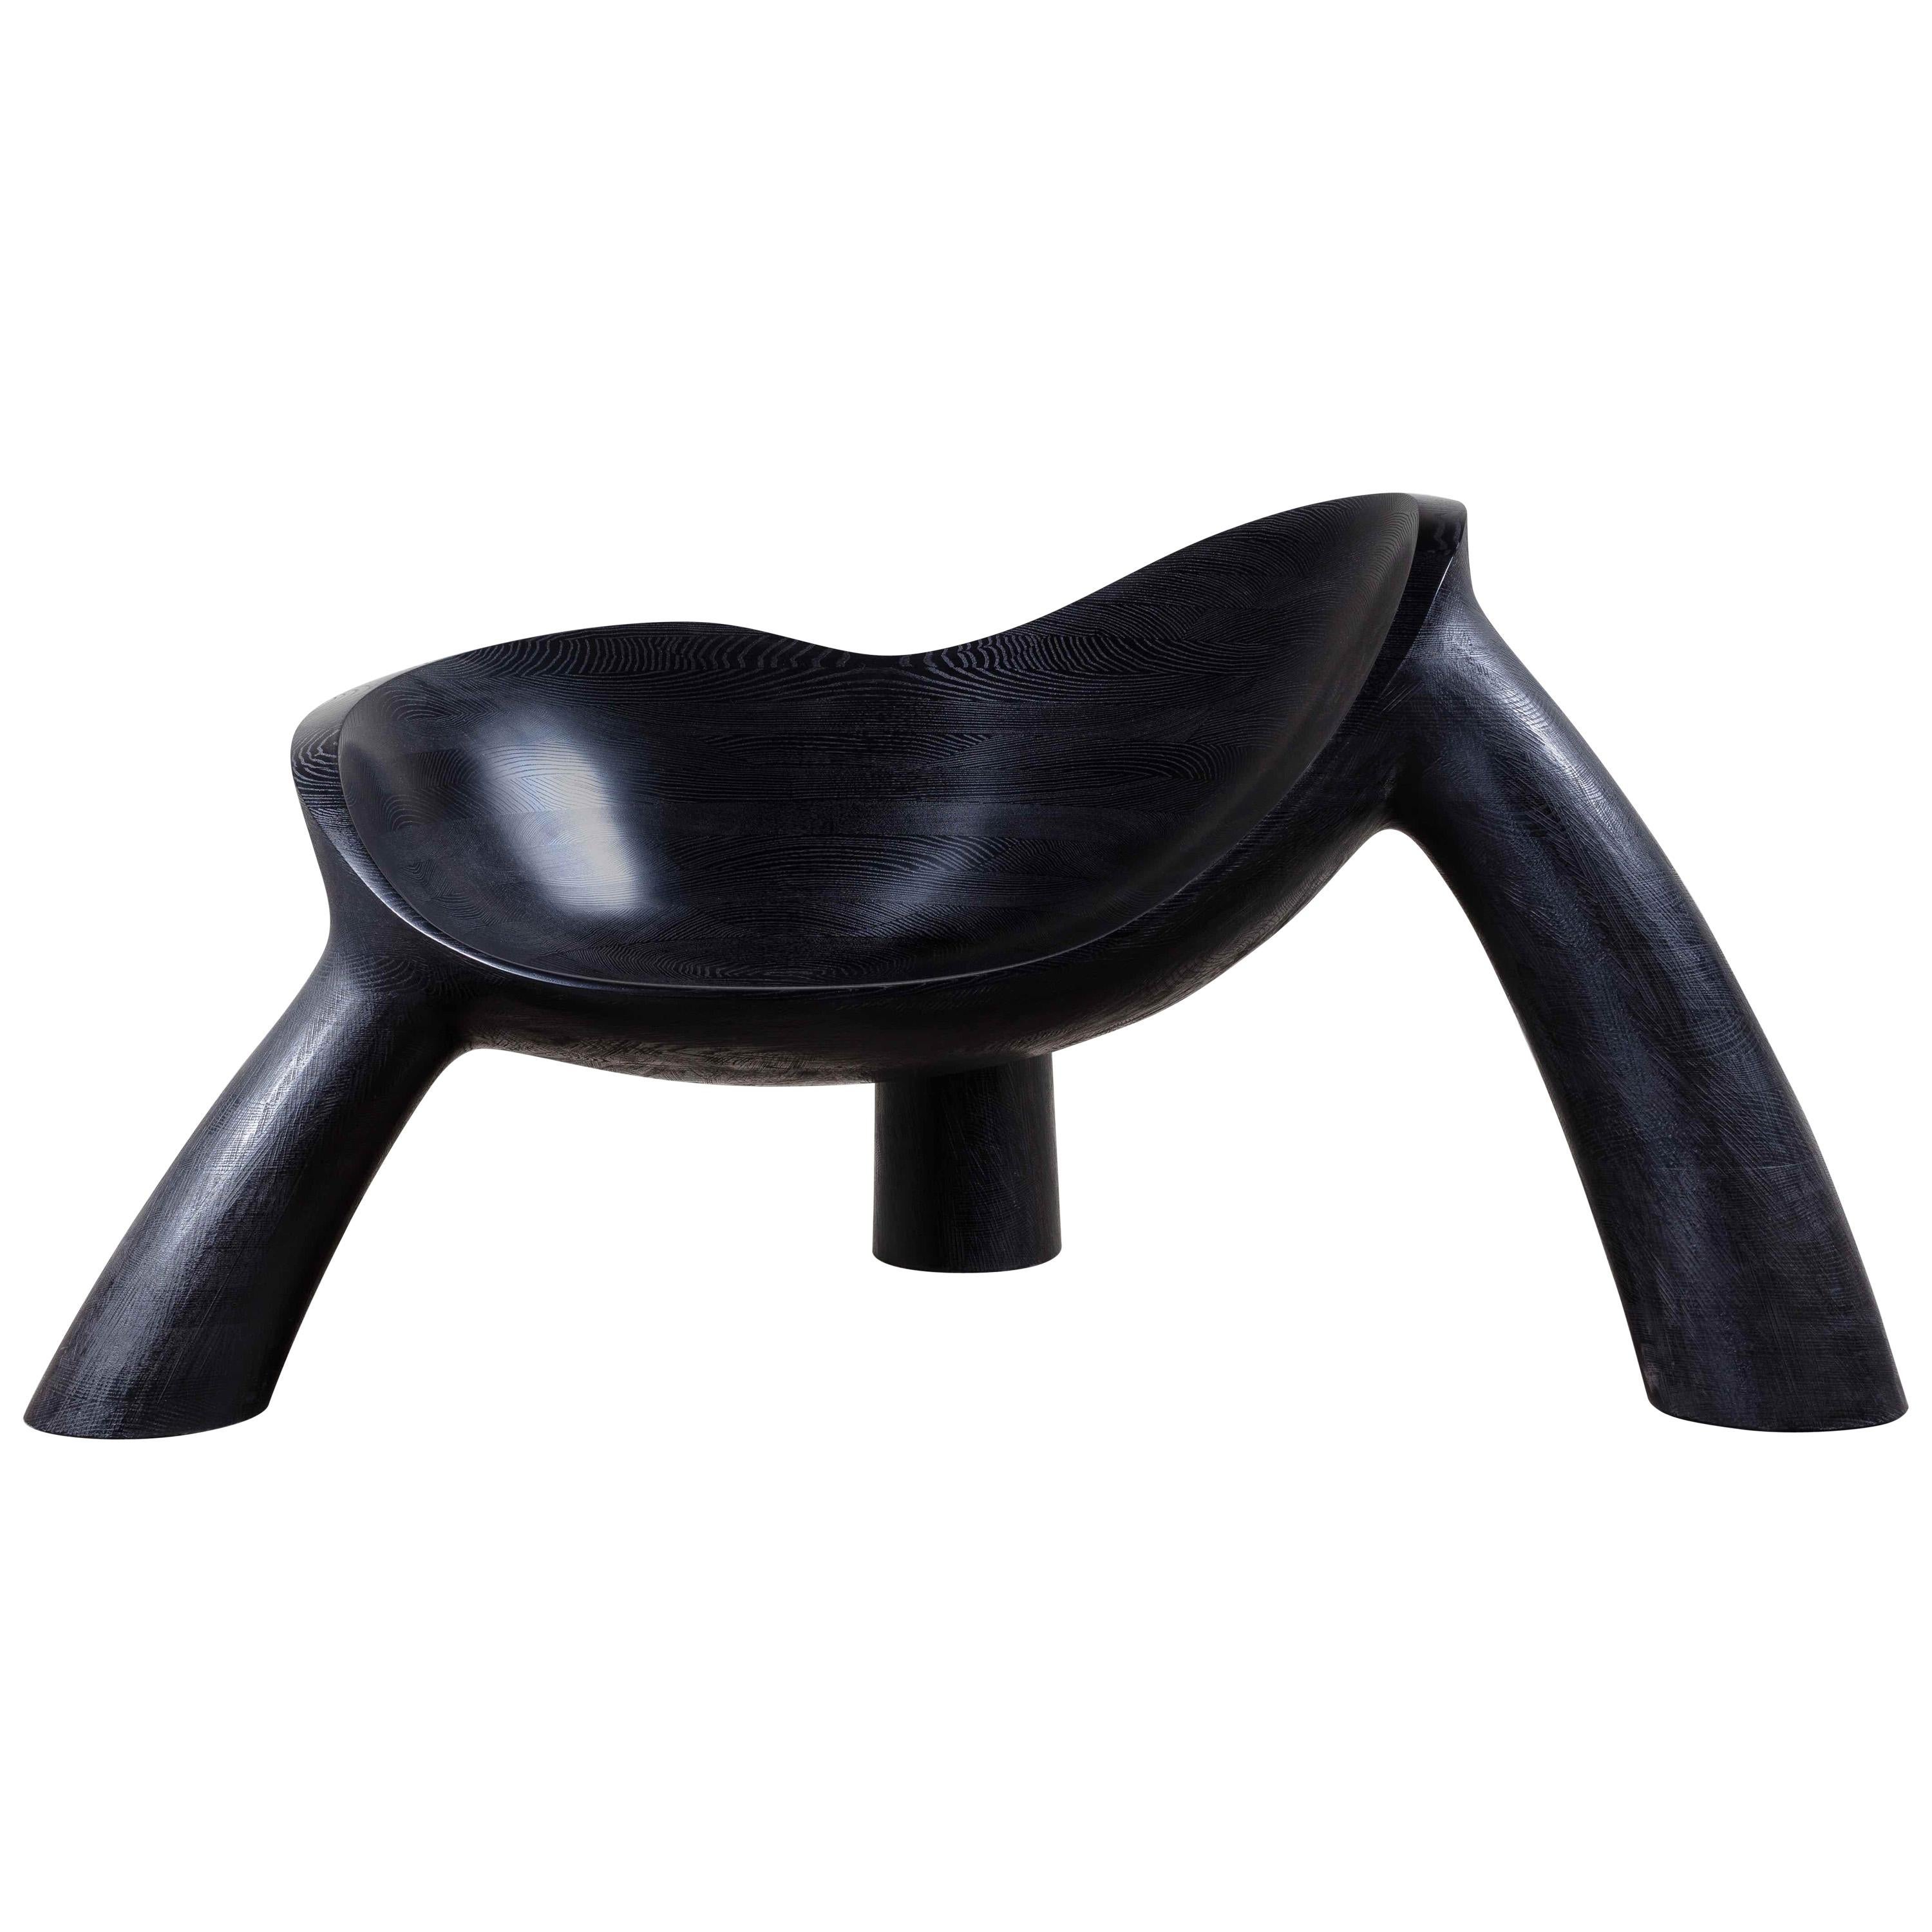 Wendell Castle, "Long Night", Black Stained Peruvian Walnut Wood Chair, 2011